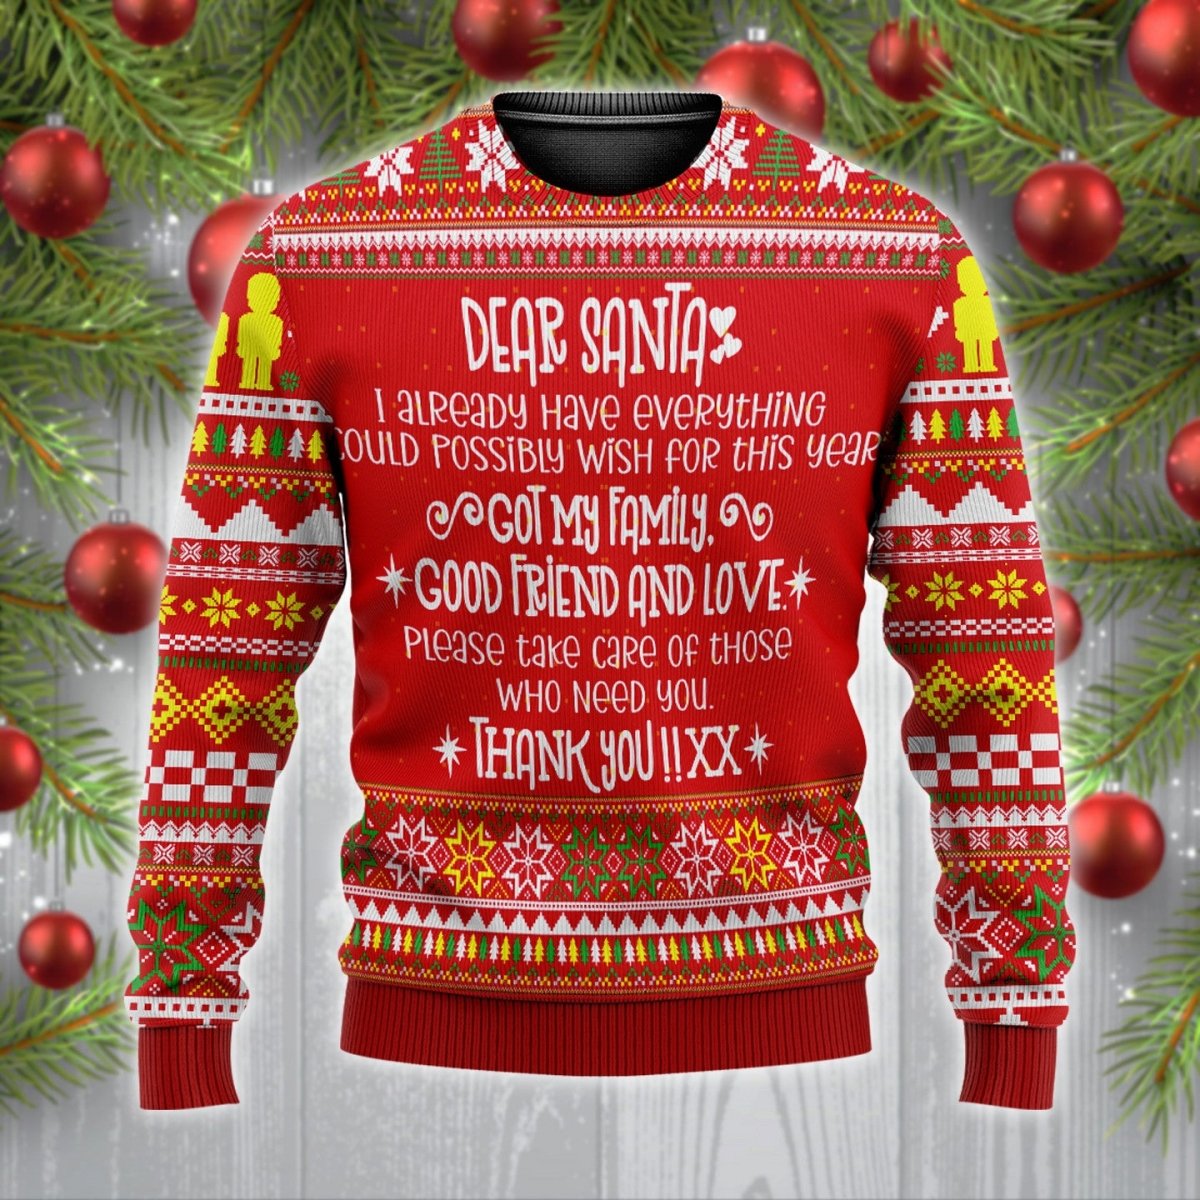 Dear Santa Please Take Care Of Those Who Need You Ugly Sweater - TG1121DT